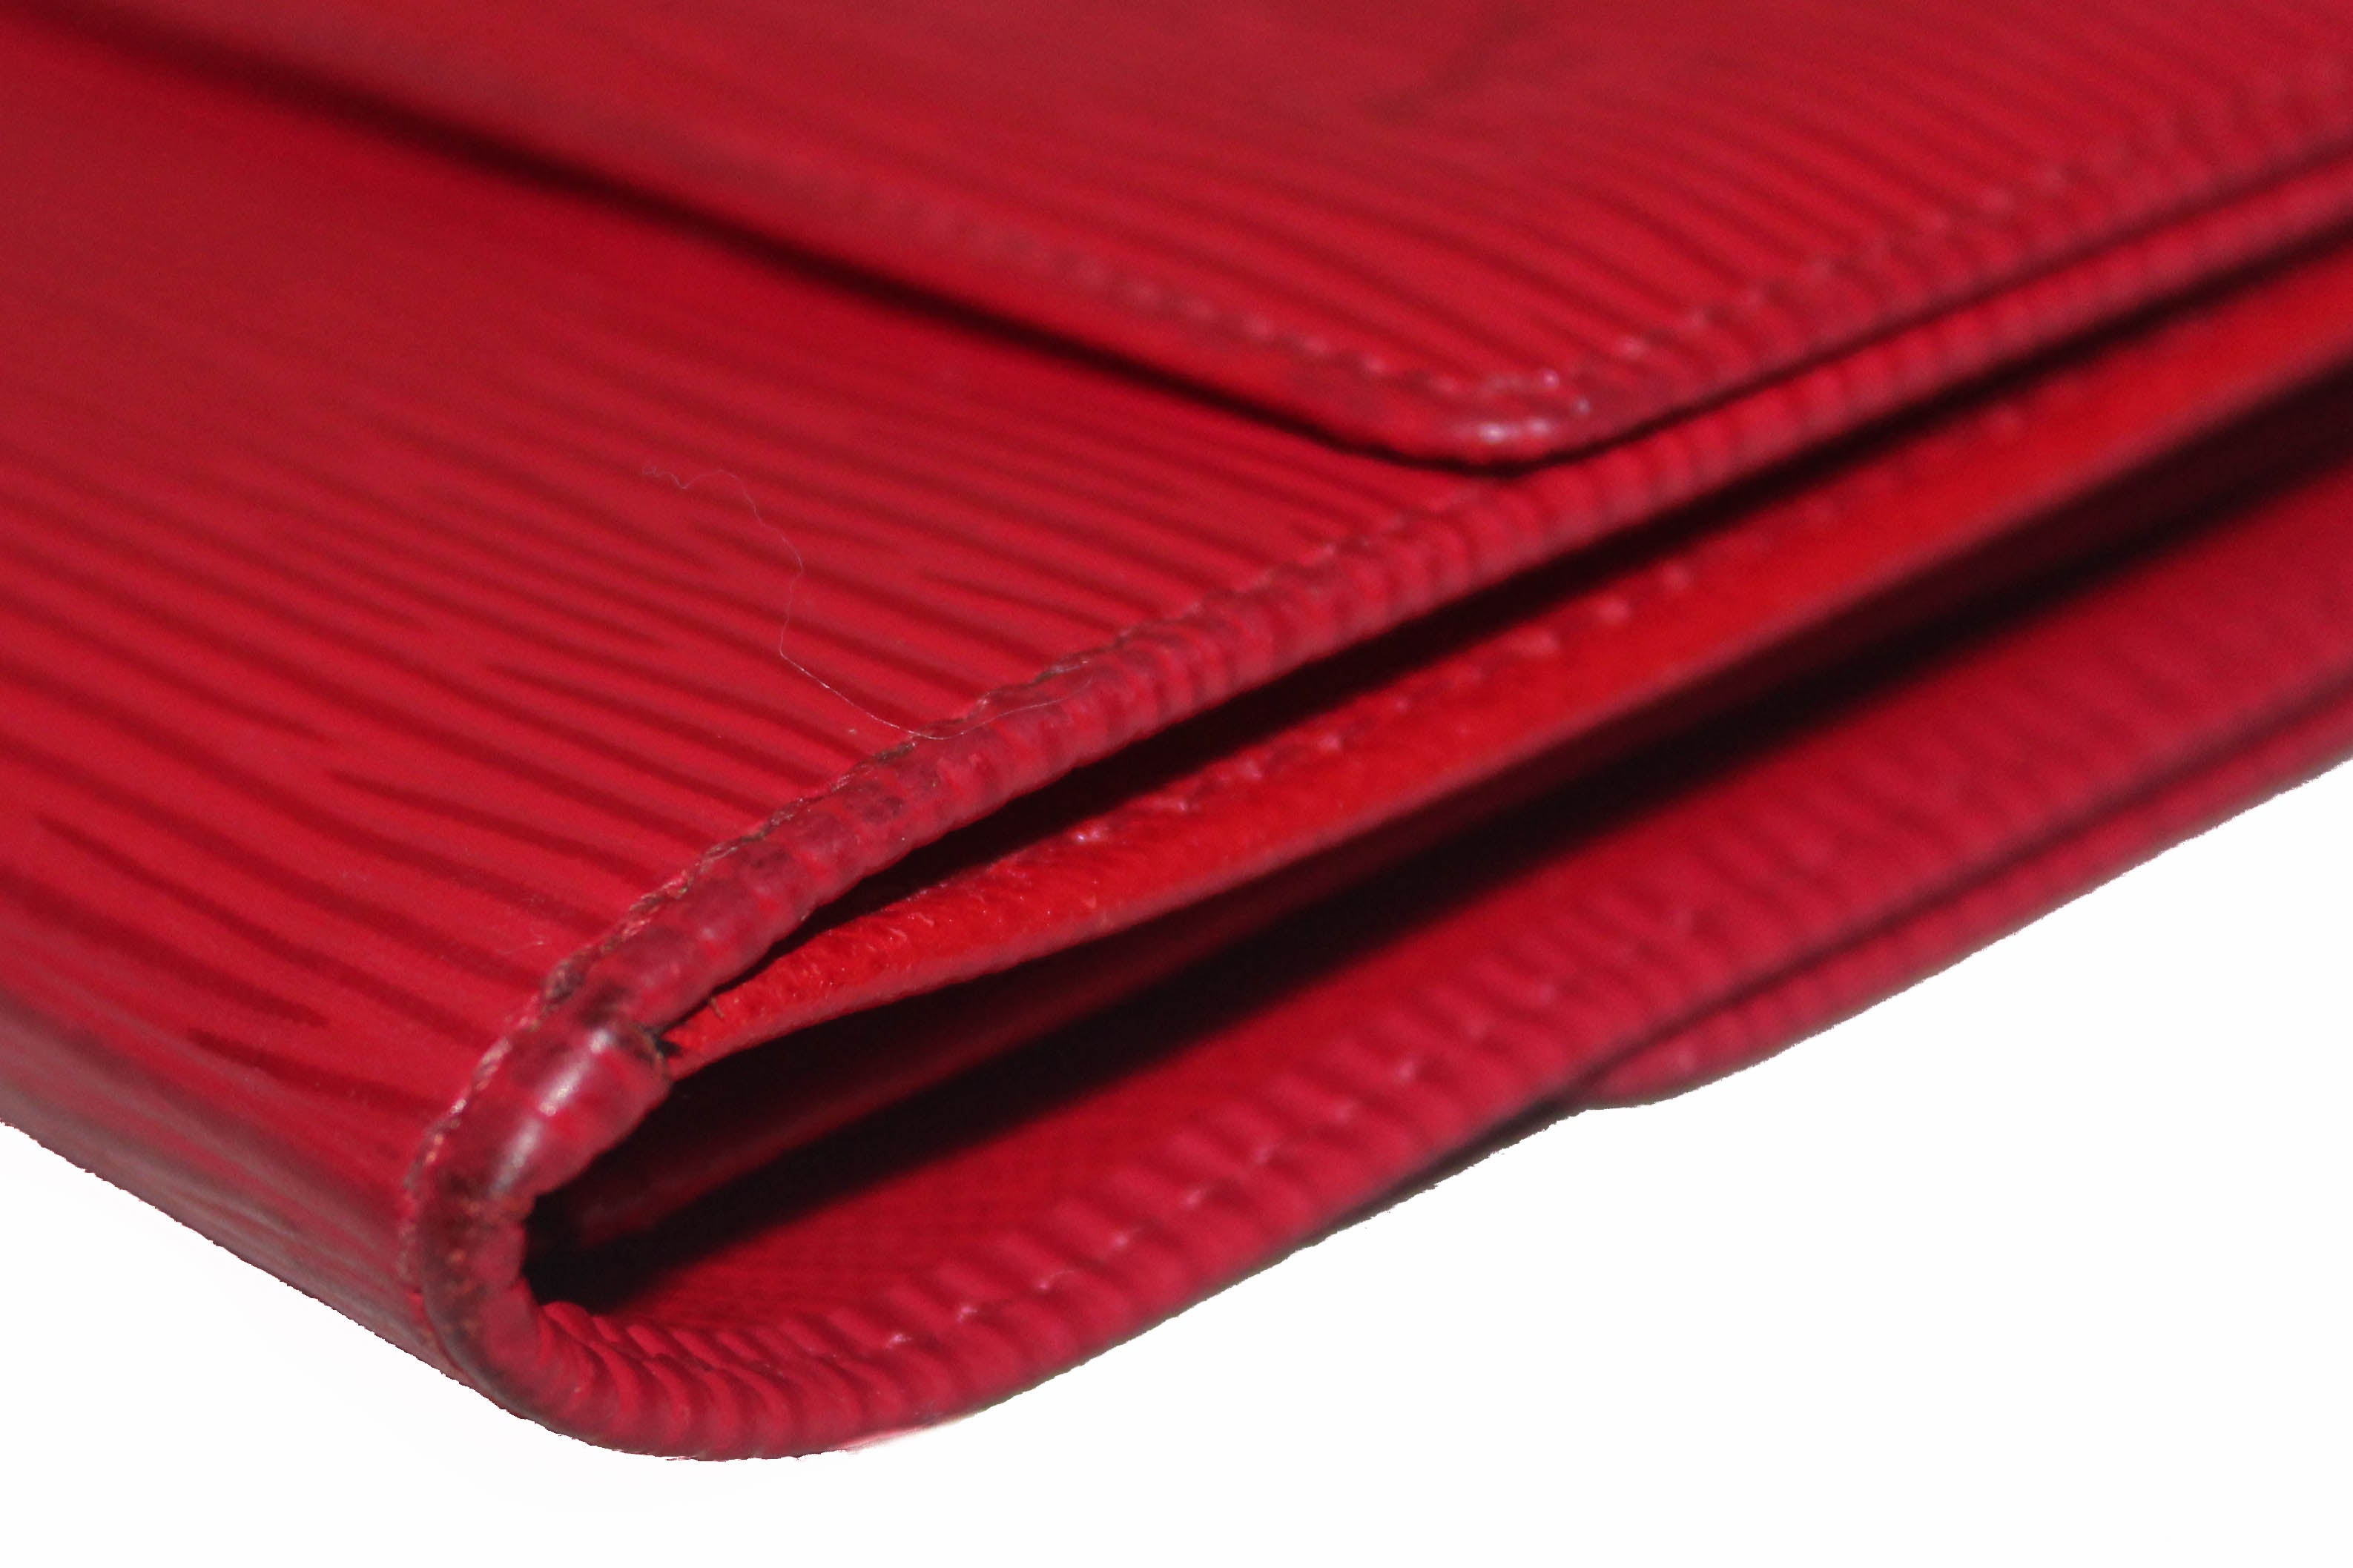 Louis Vuitton Epi Leather Compact Wallet - Red Wallets